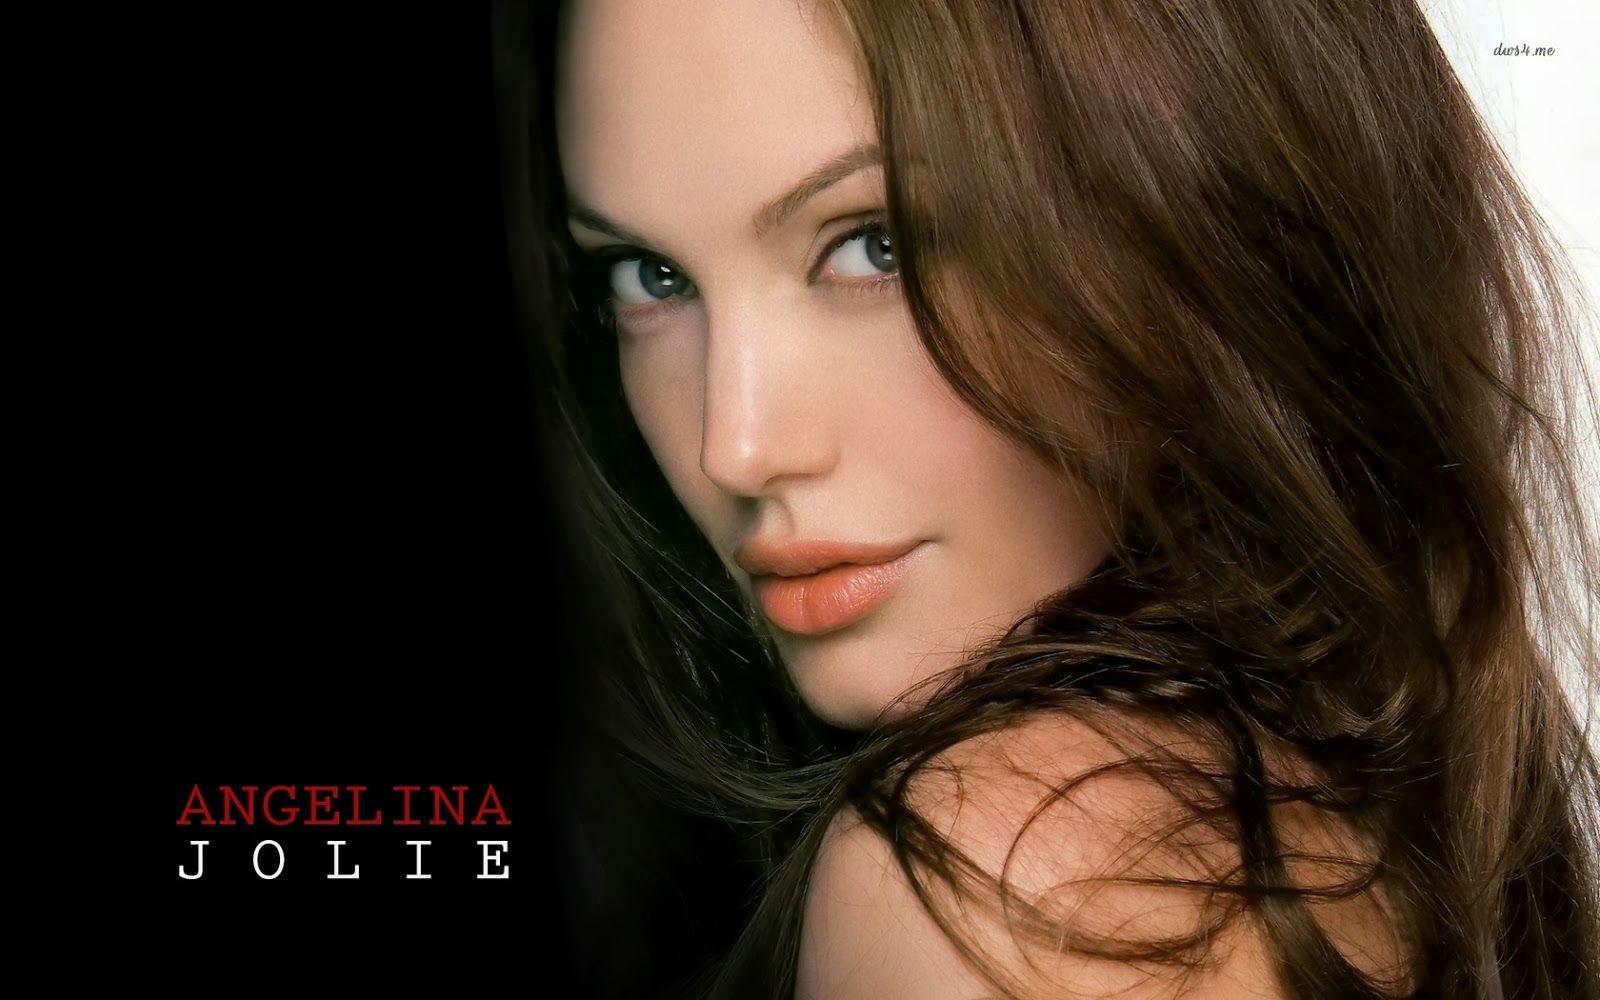 40 Angelina Jolie wallpapers HD  Download Free backgrounds